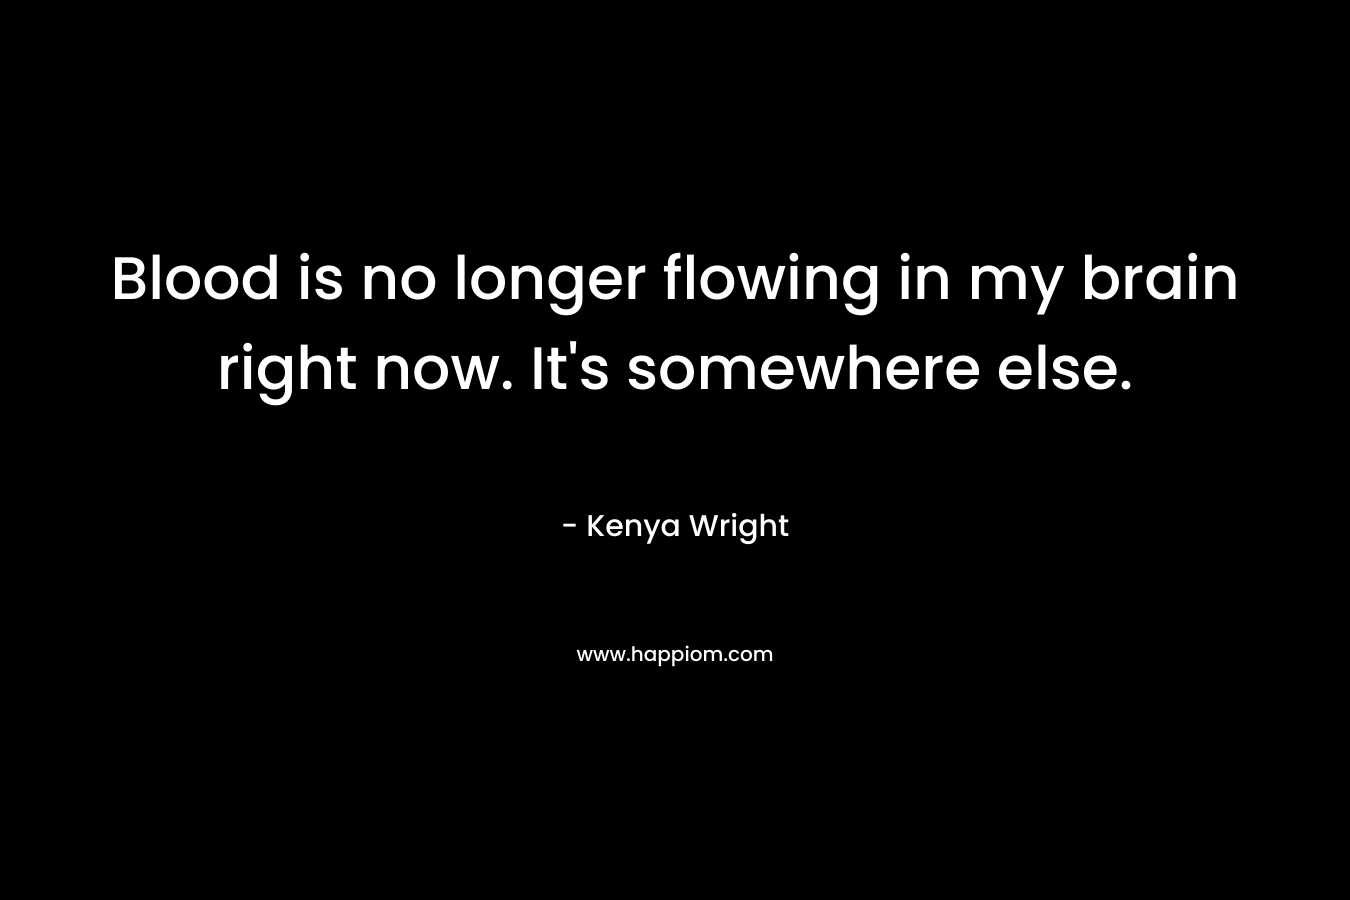 Blood is no longer flowing in my brain right now. It’s somewhere else. – Kenya Wright